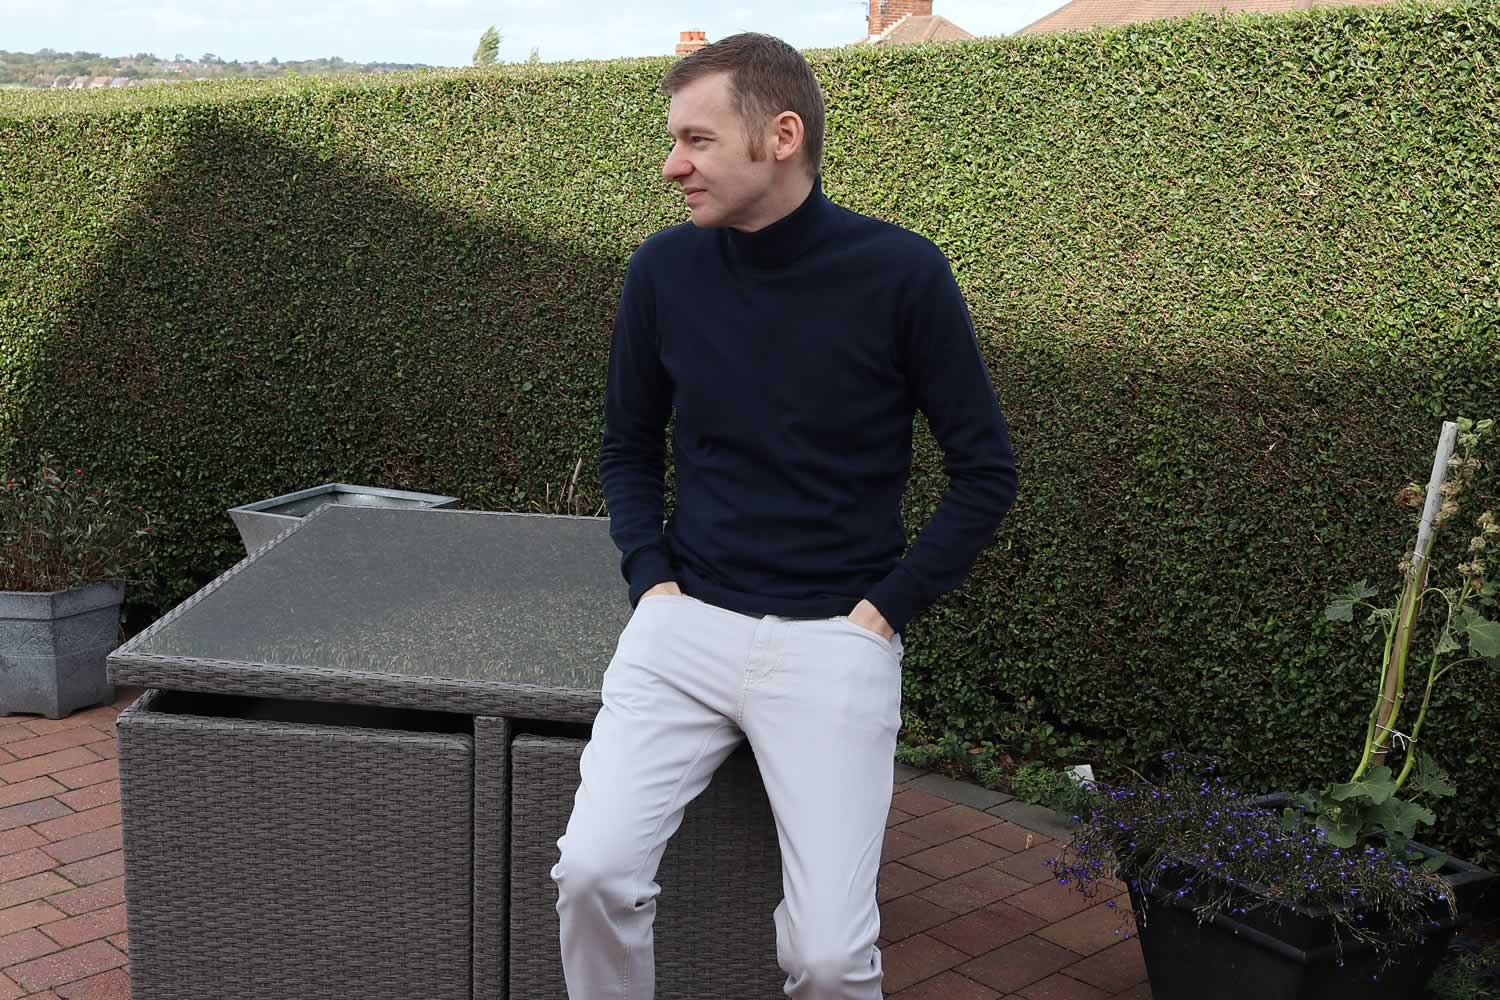 Navy Roll Neck T Shirt From Uniqlo: How To Style | Michael 84